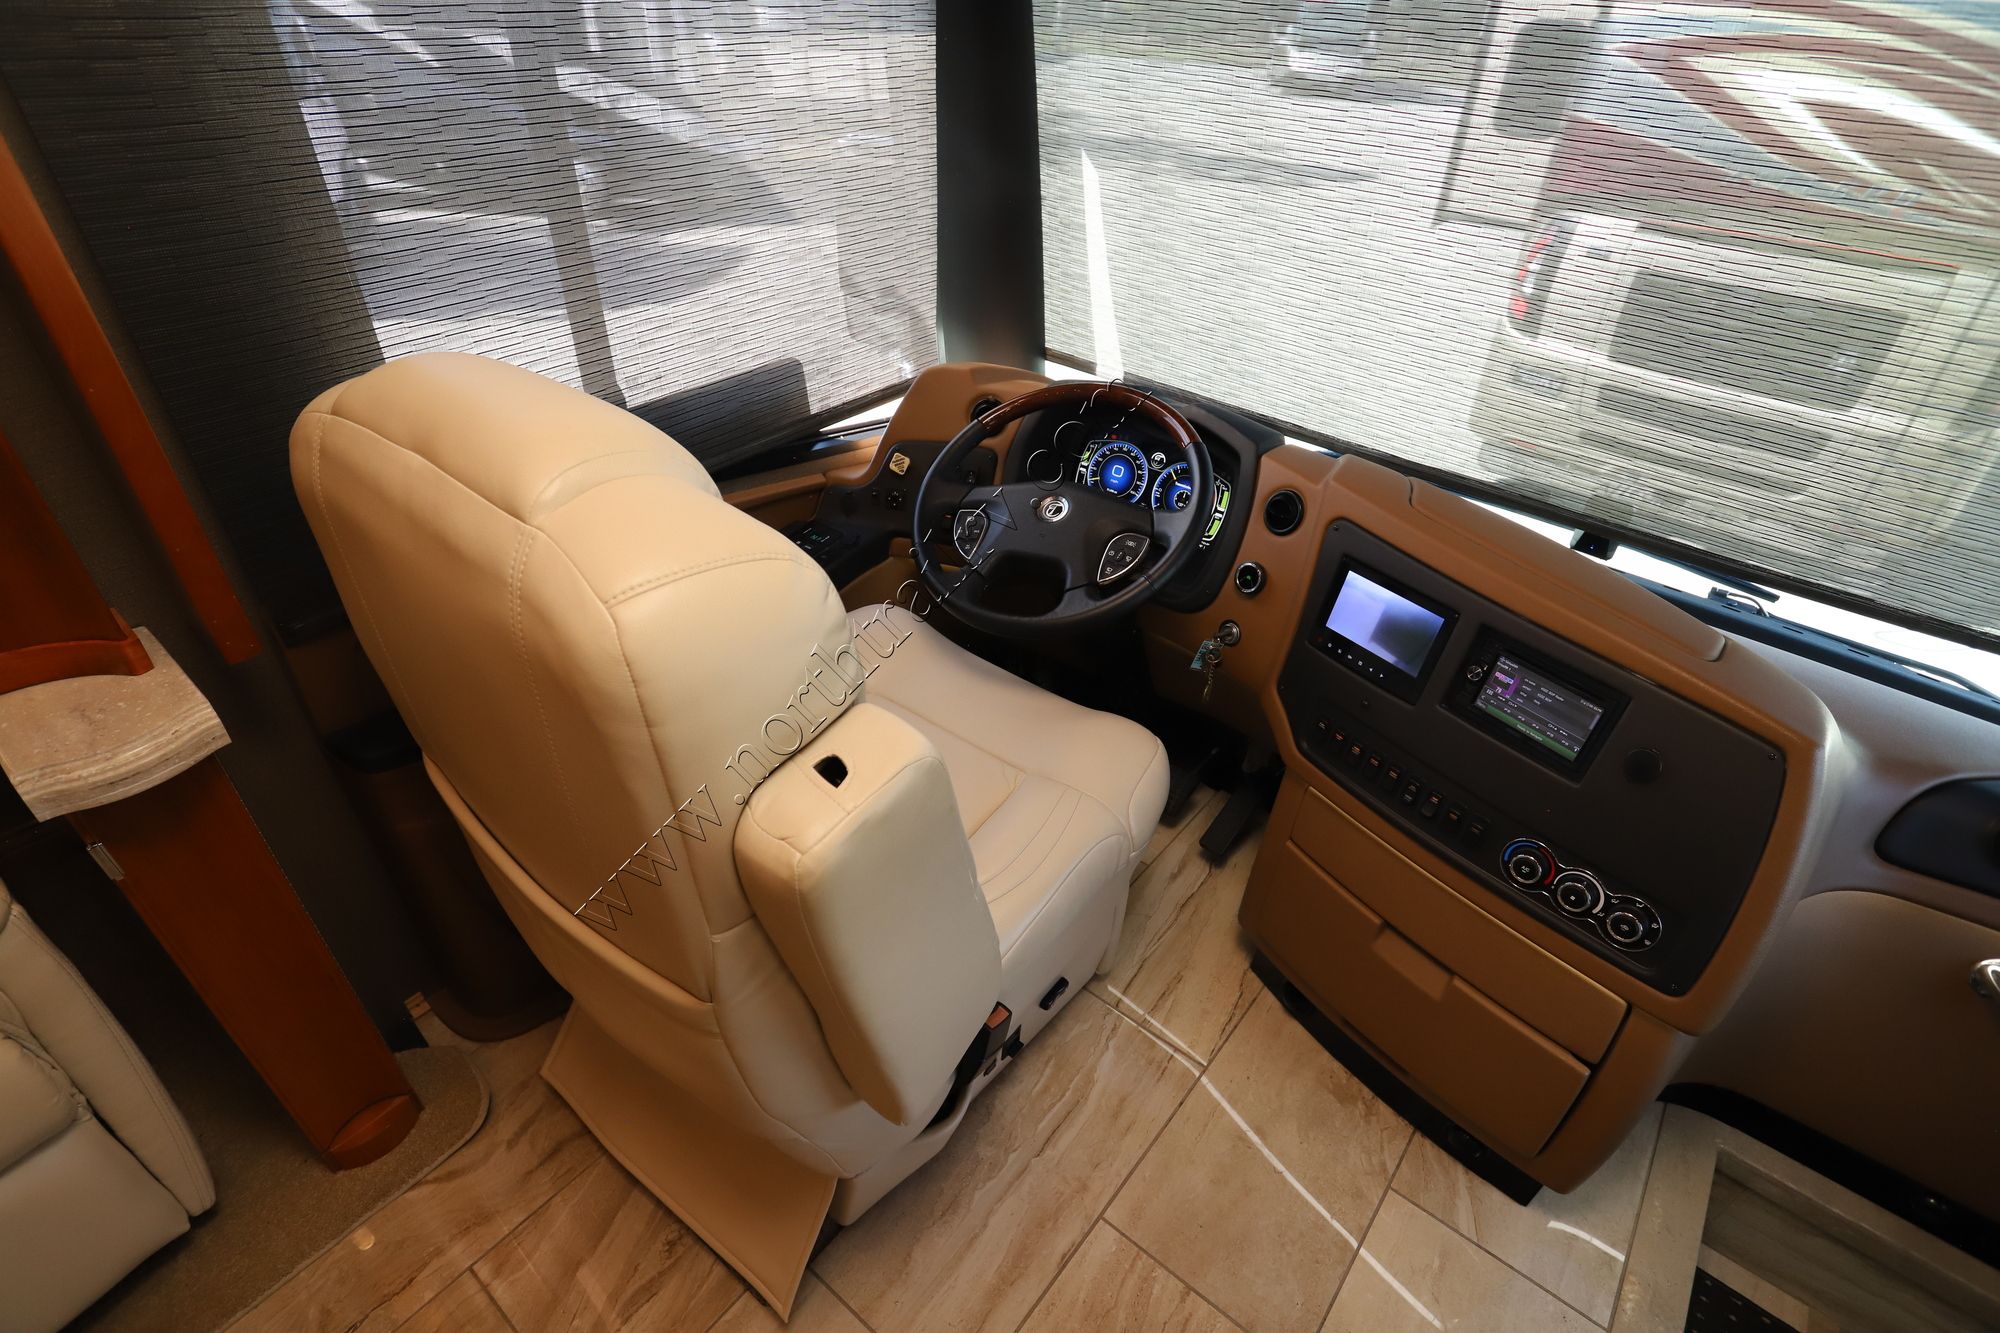 Used 2019 Tiffin Motor Homes Allegro Bus 37AP Class A  For Sale